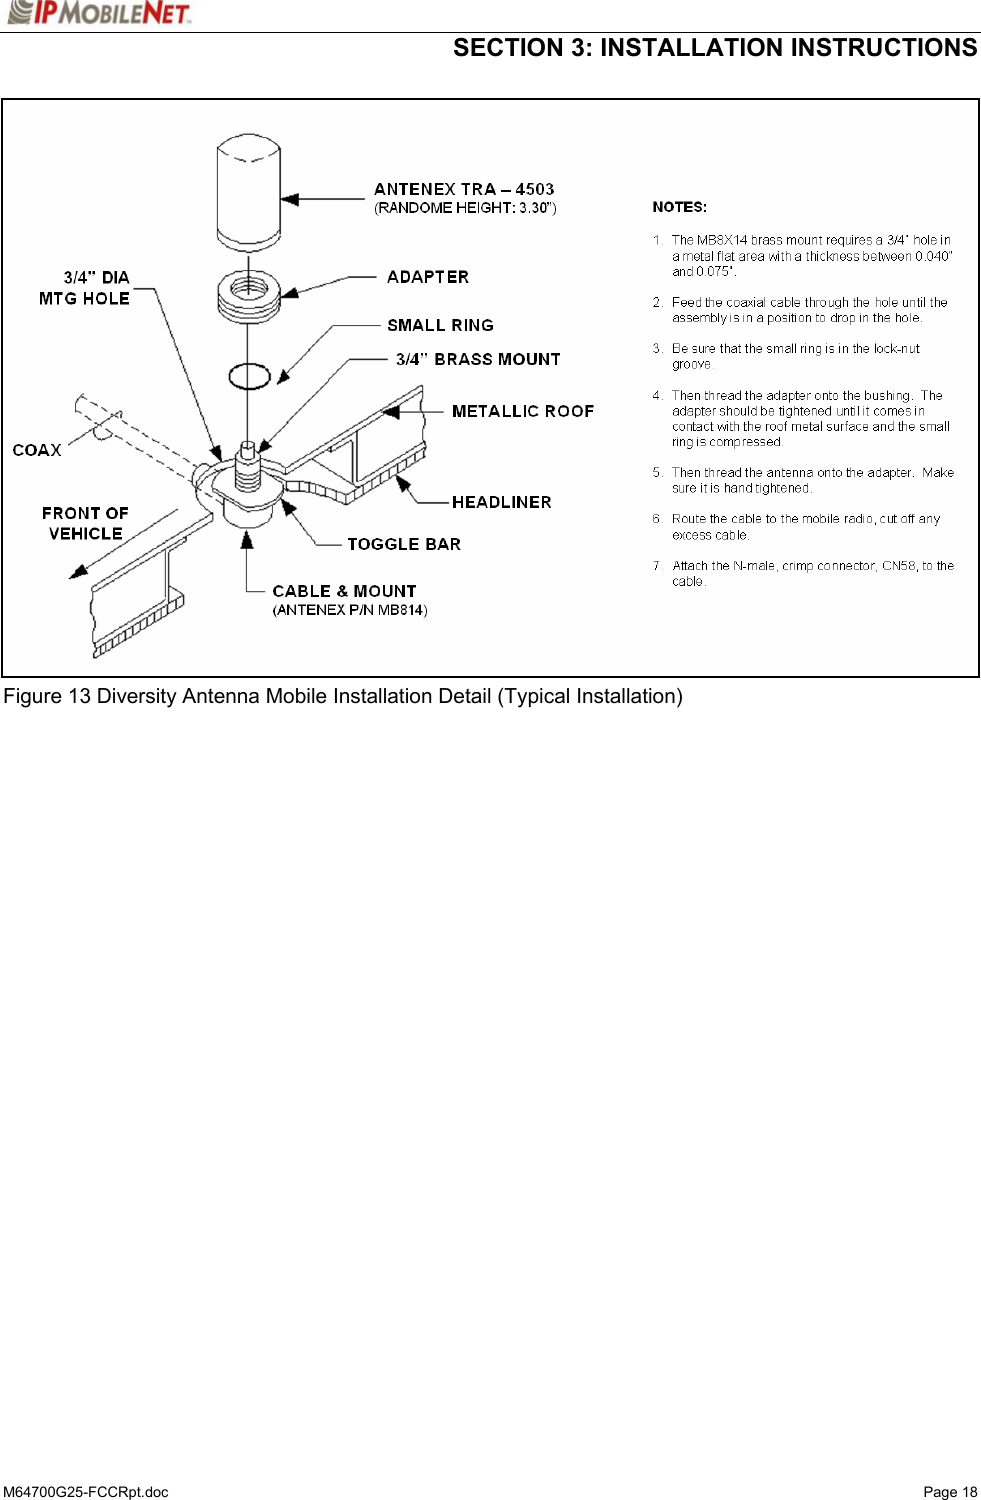  SECTION 3: INSTALLATION INSTRUCTIONS  M64700G25-FCCRpt.doc   Page 18                          Figure 13 Diversity Antenna Mobile Installation Detail (Typical Installation)                             